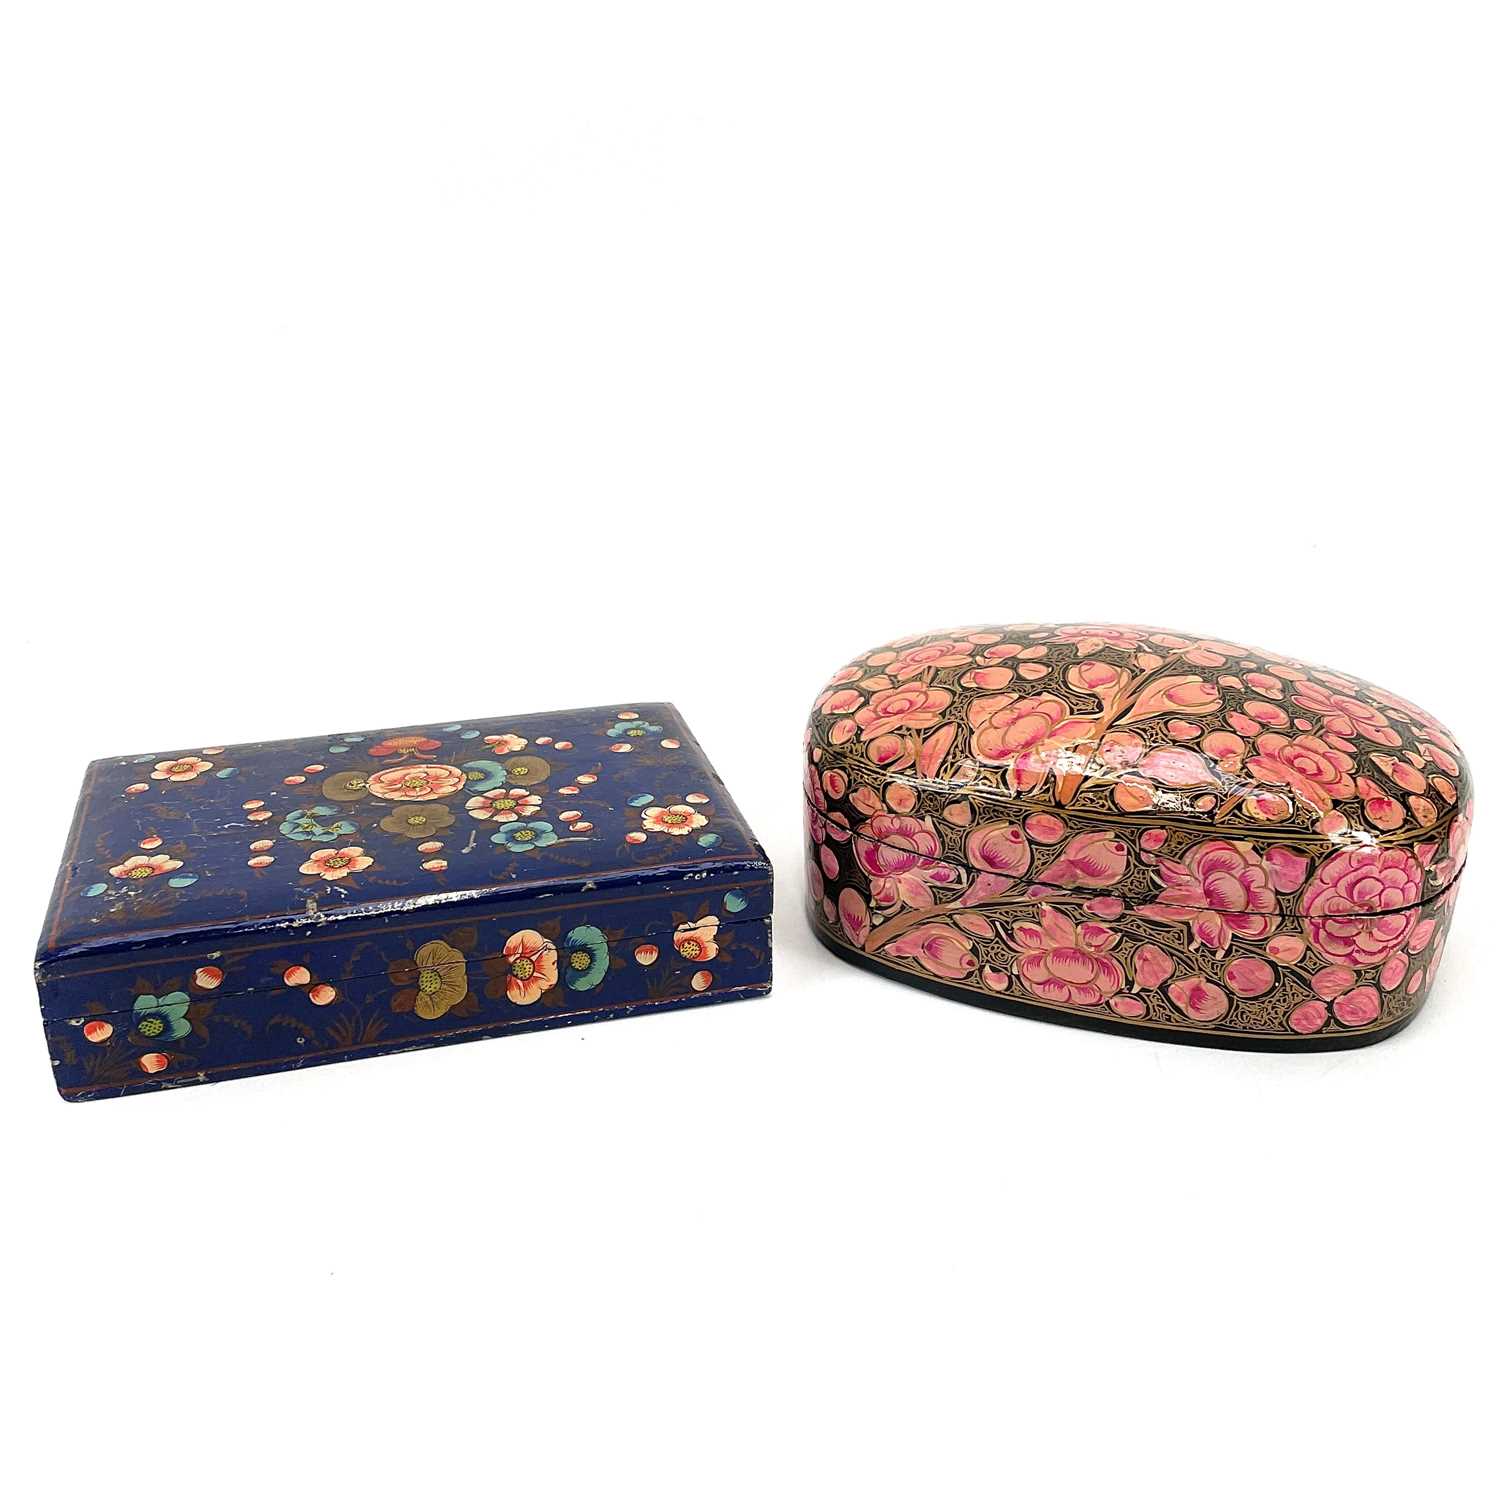 Lot 1057 - A 20th century Persian lacquer box and cover.